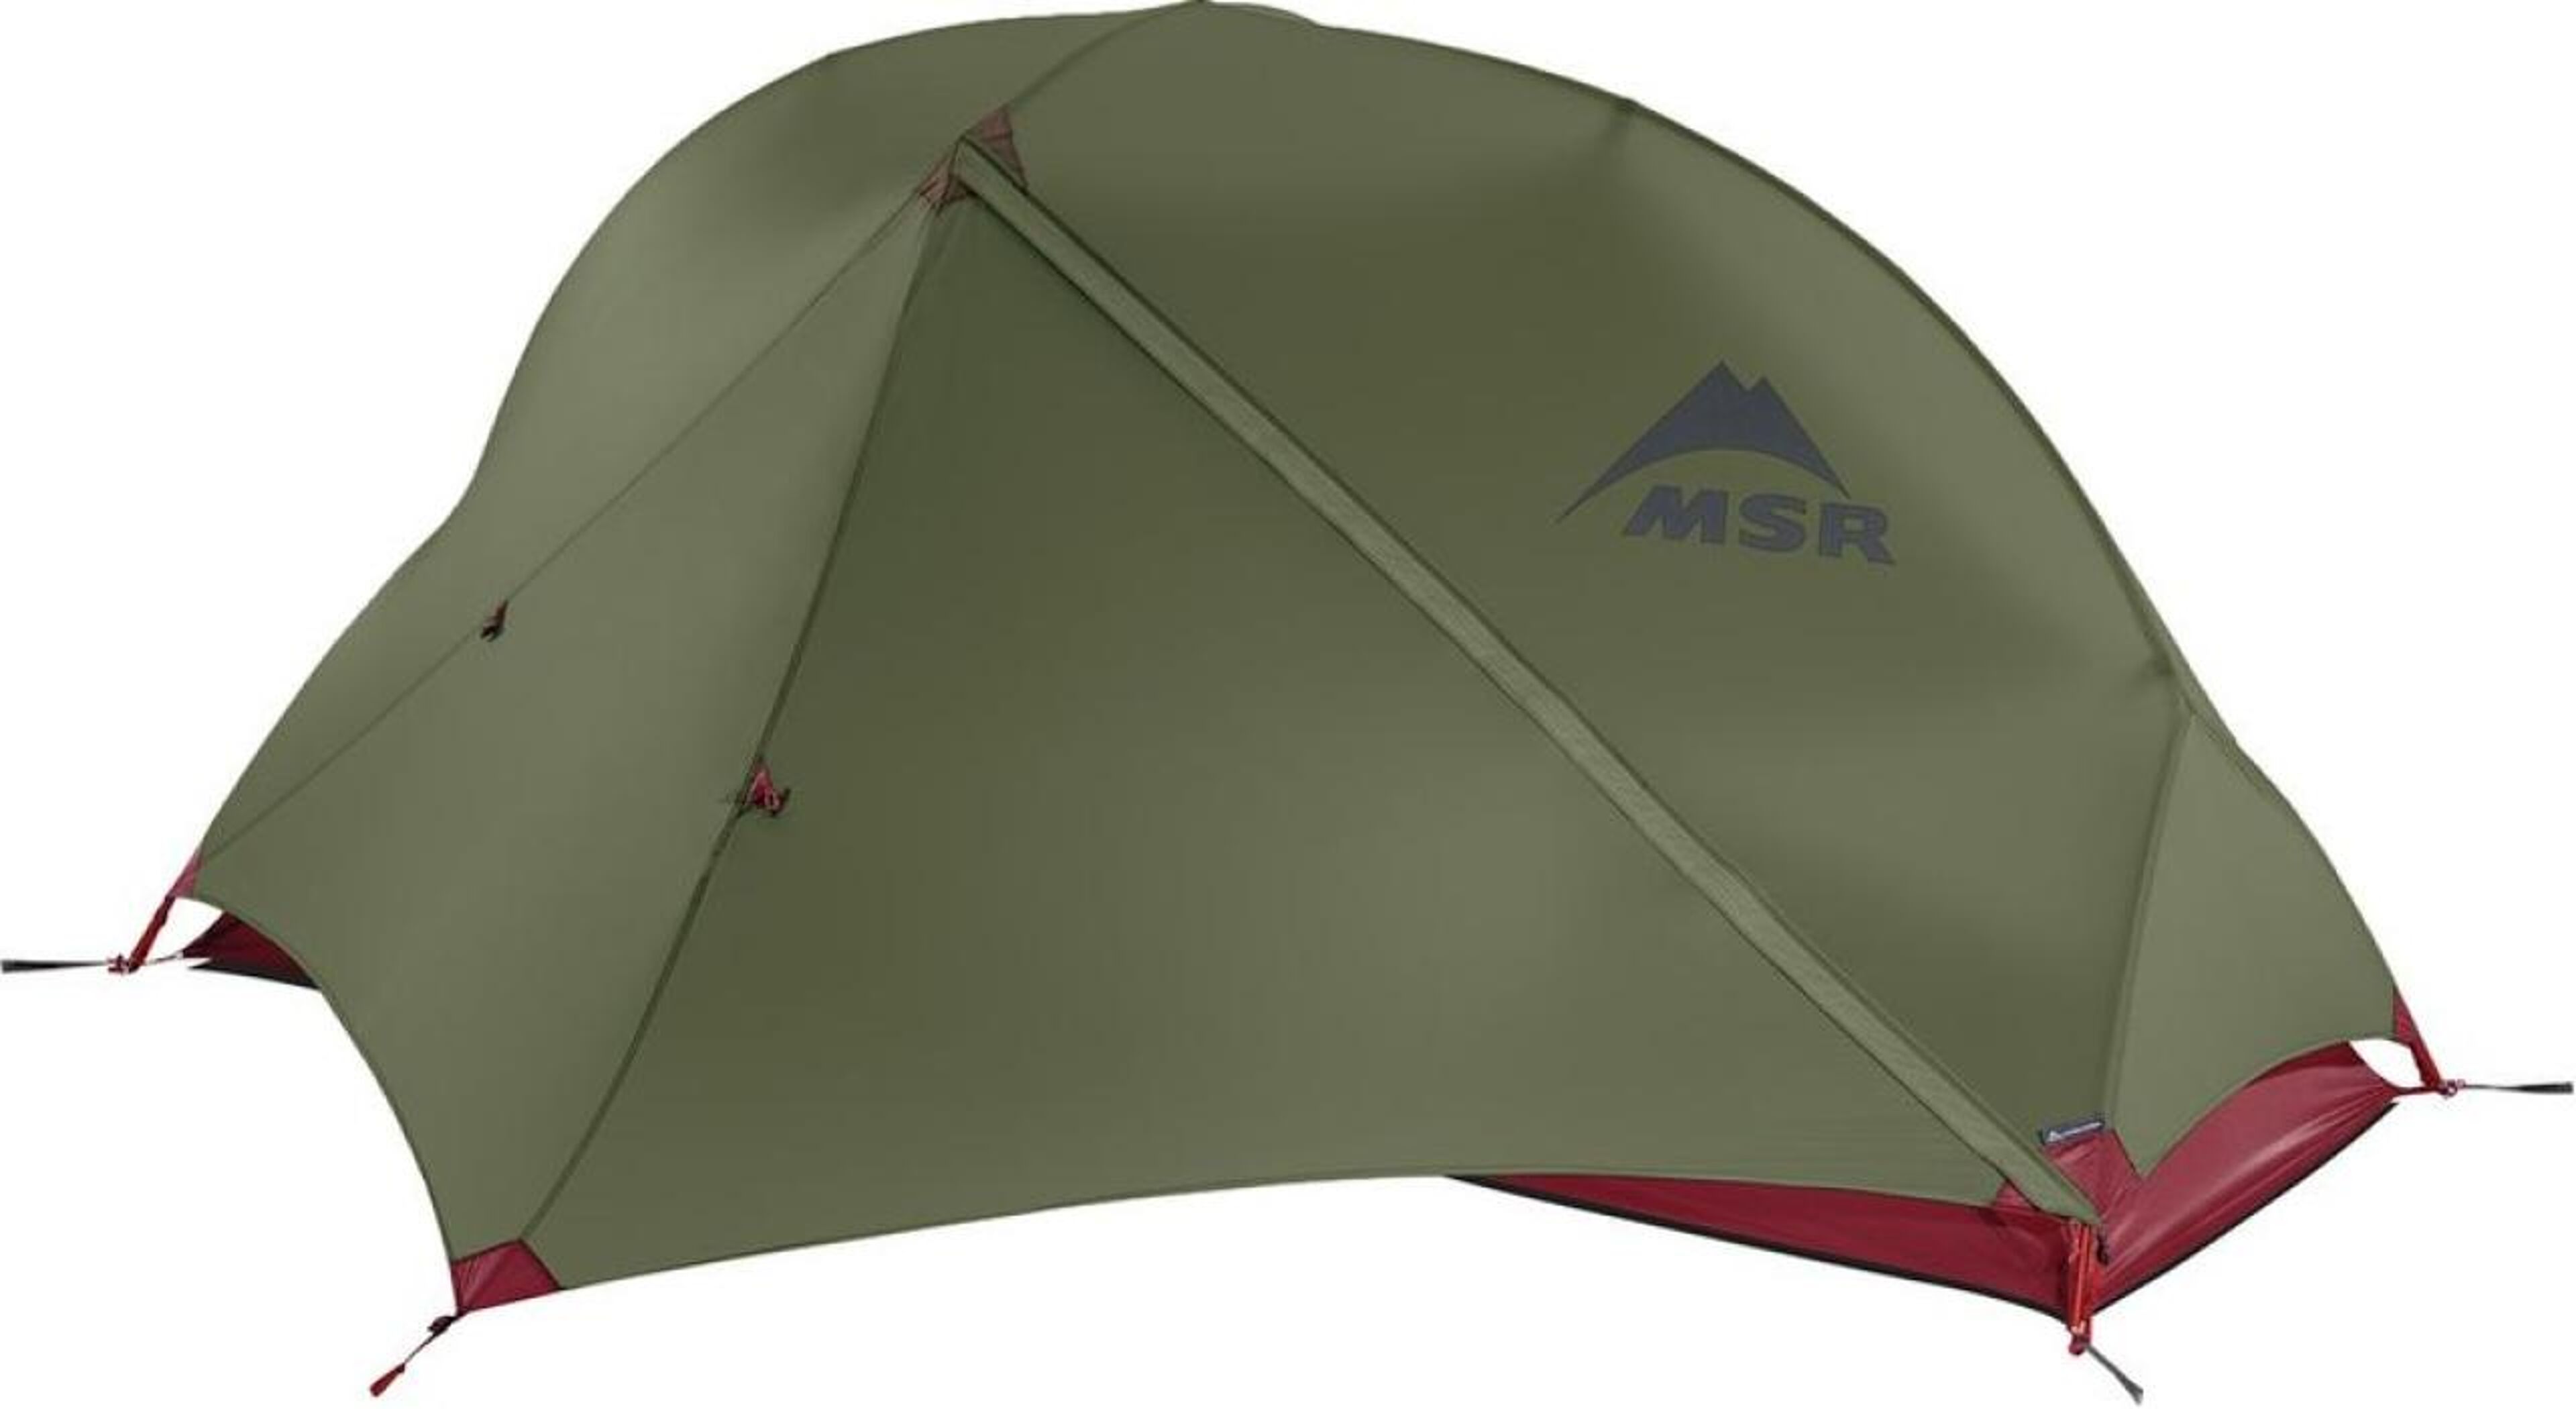 MSR Hubba NX solo backpacking tent